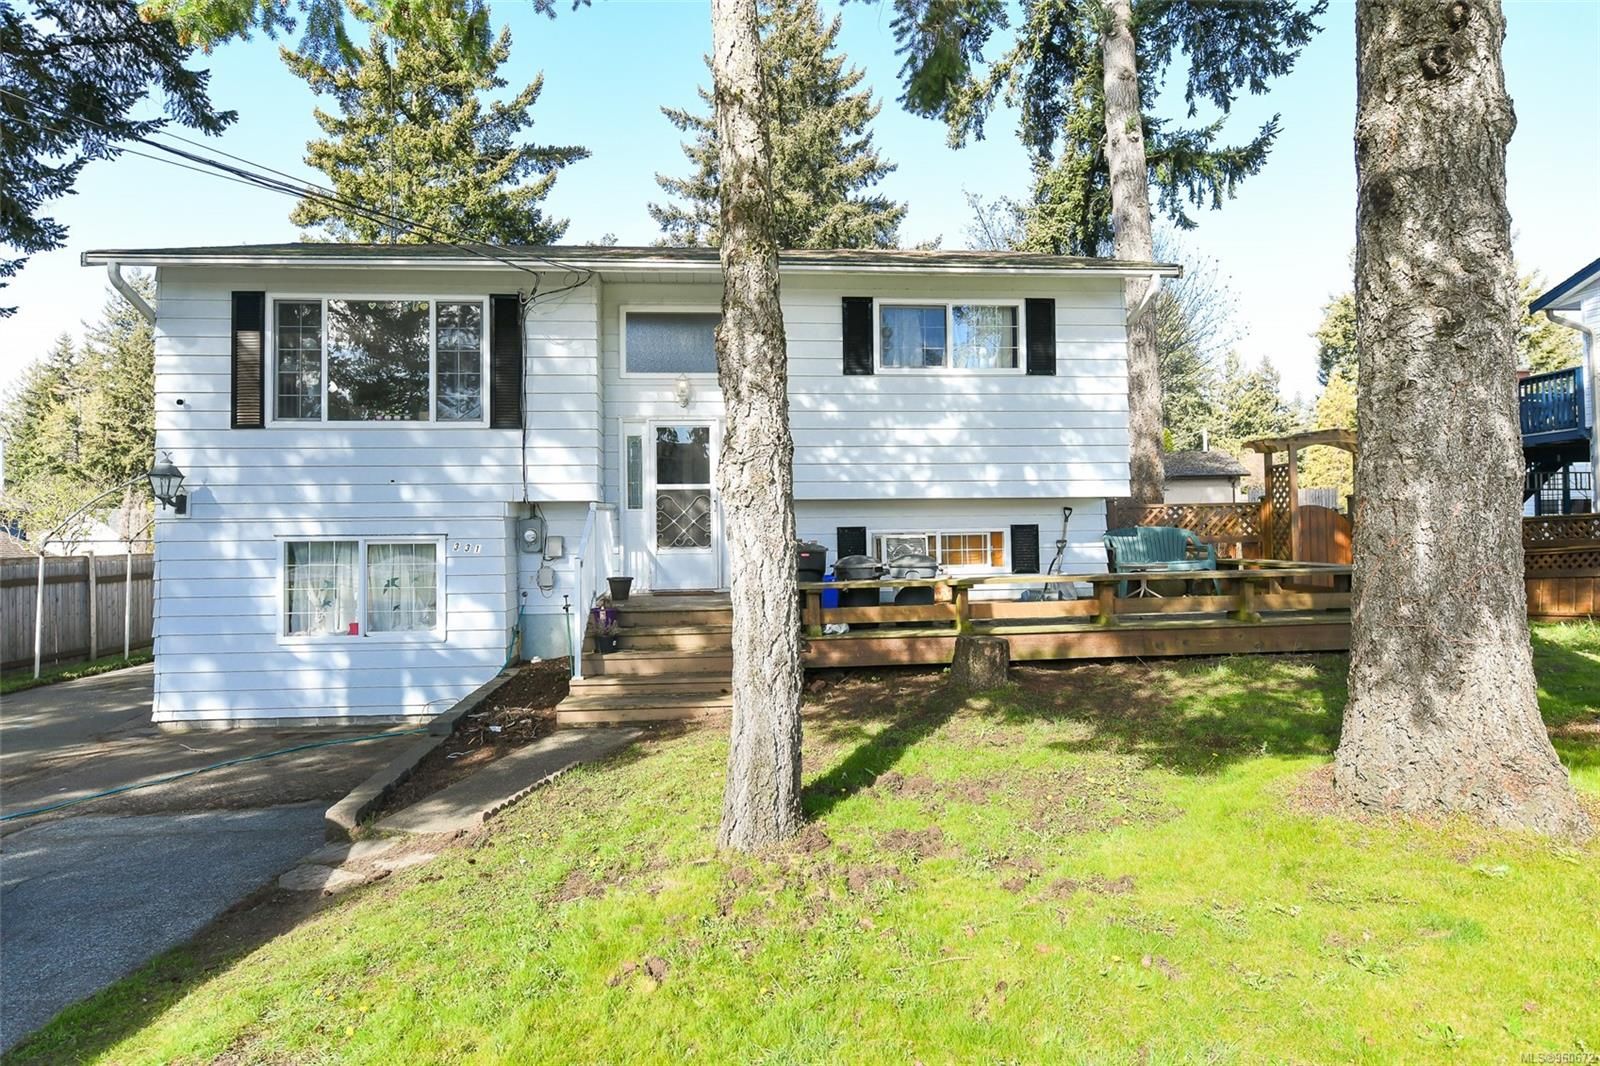 New property listed in CV Comox (Town of), Comox Valley